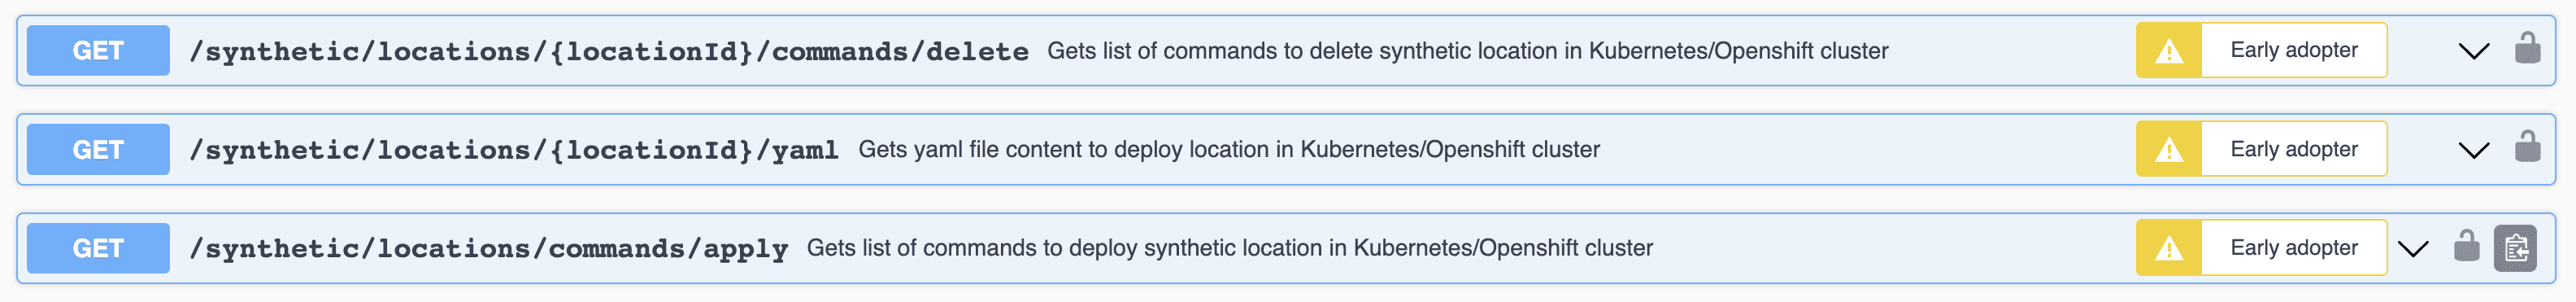 New endpoints for Kubernetes location deployment